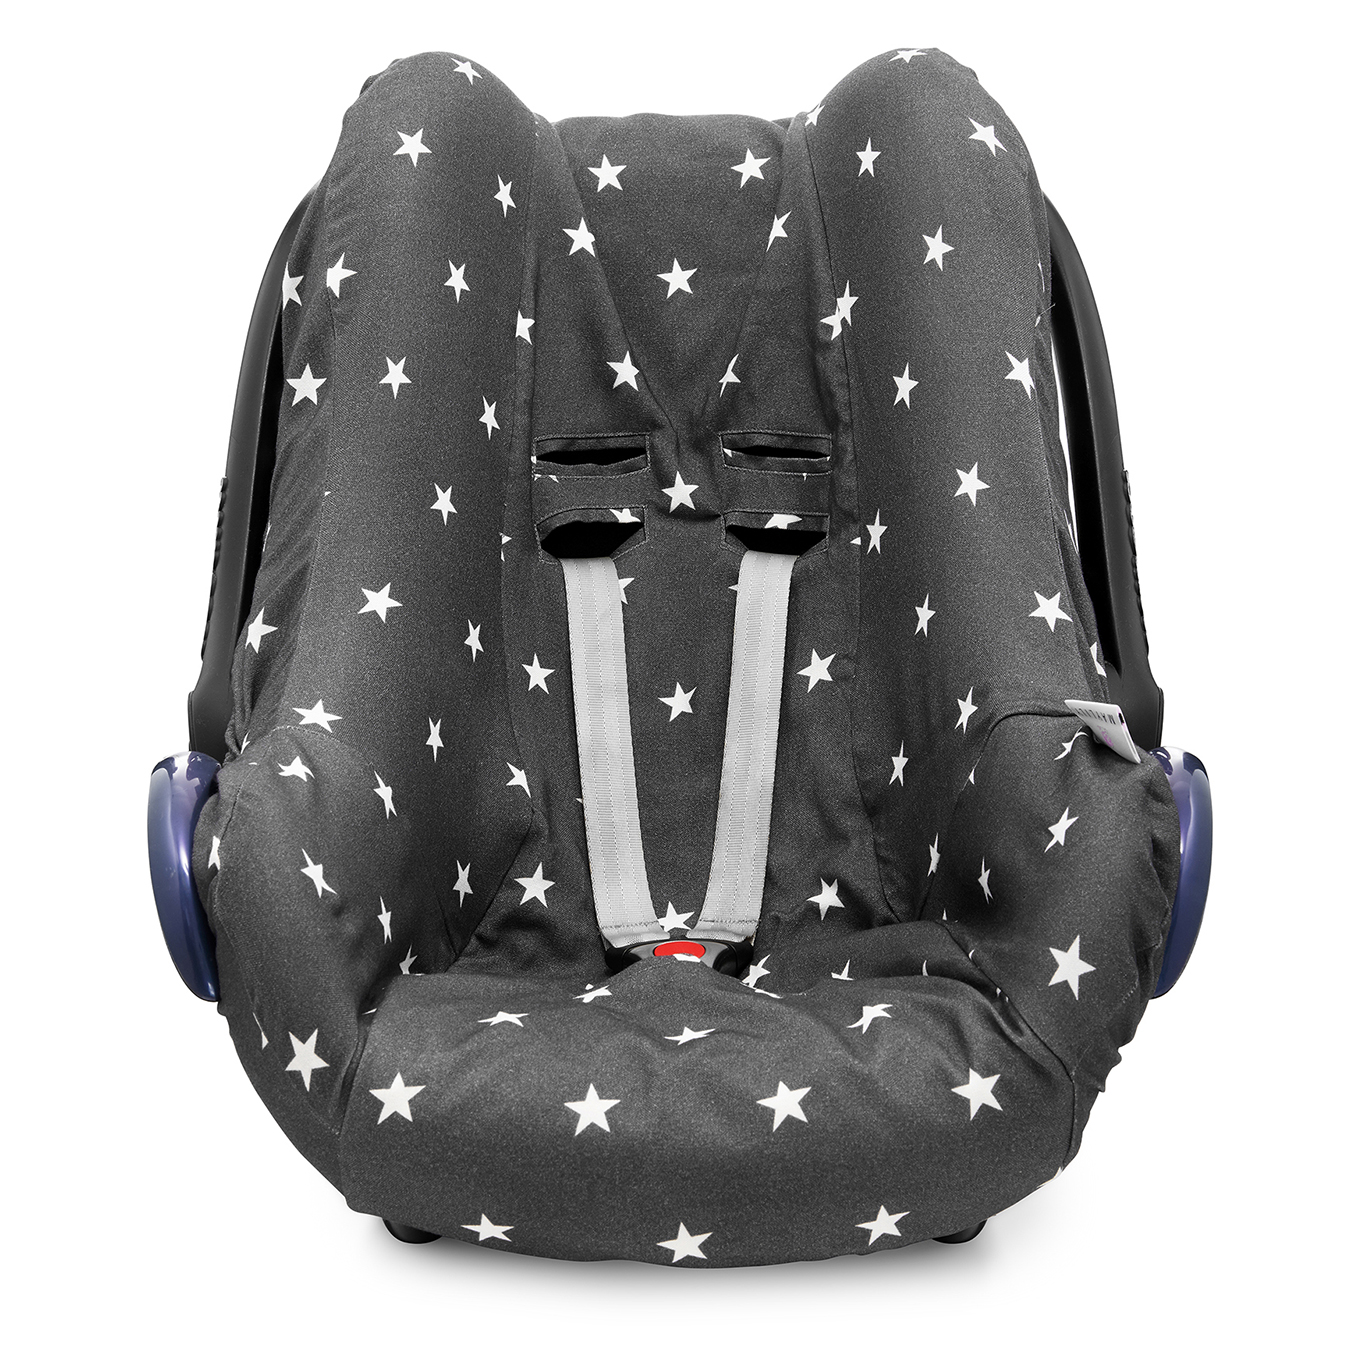 Bamboo car seat cover - Stars